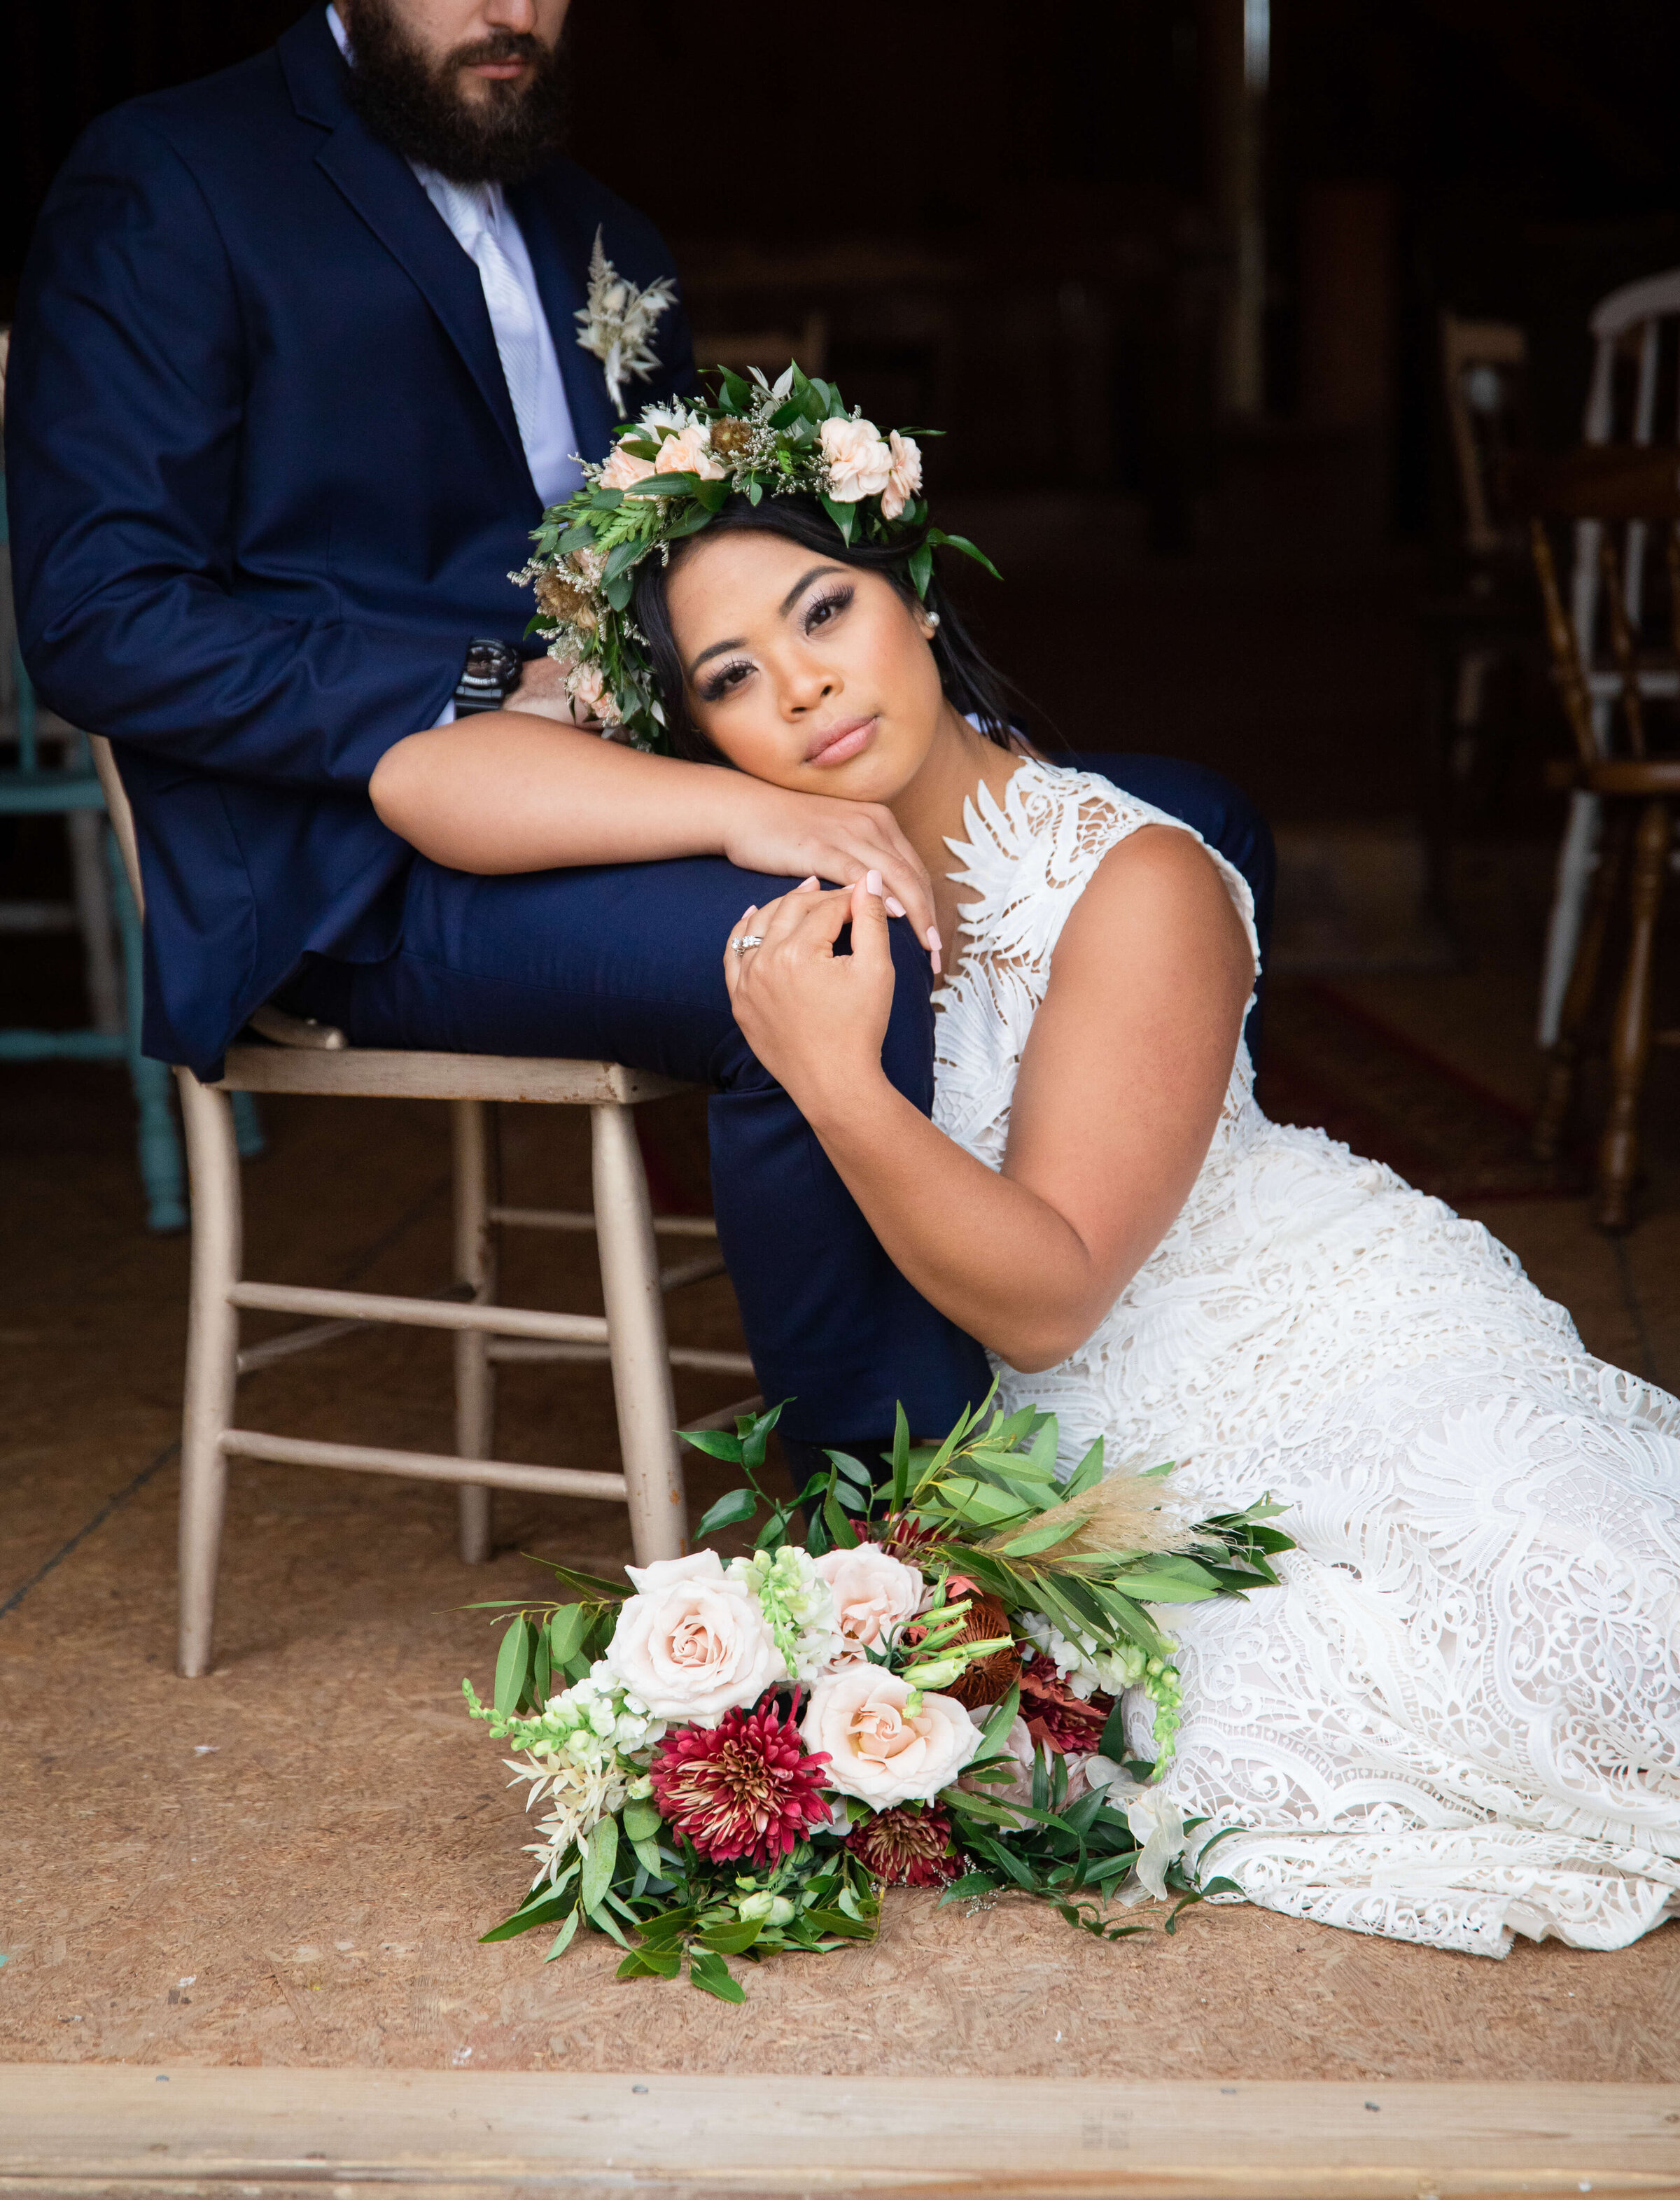 A bride is sitting on the floor while her groom sits on a chair next to her. She is resting her face on his leg and looks content and happy. She is wearing a white dress, a floral head crown, and a bouquet of flowers on the floor.